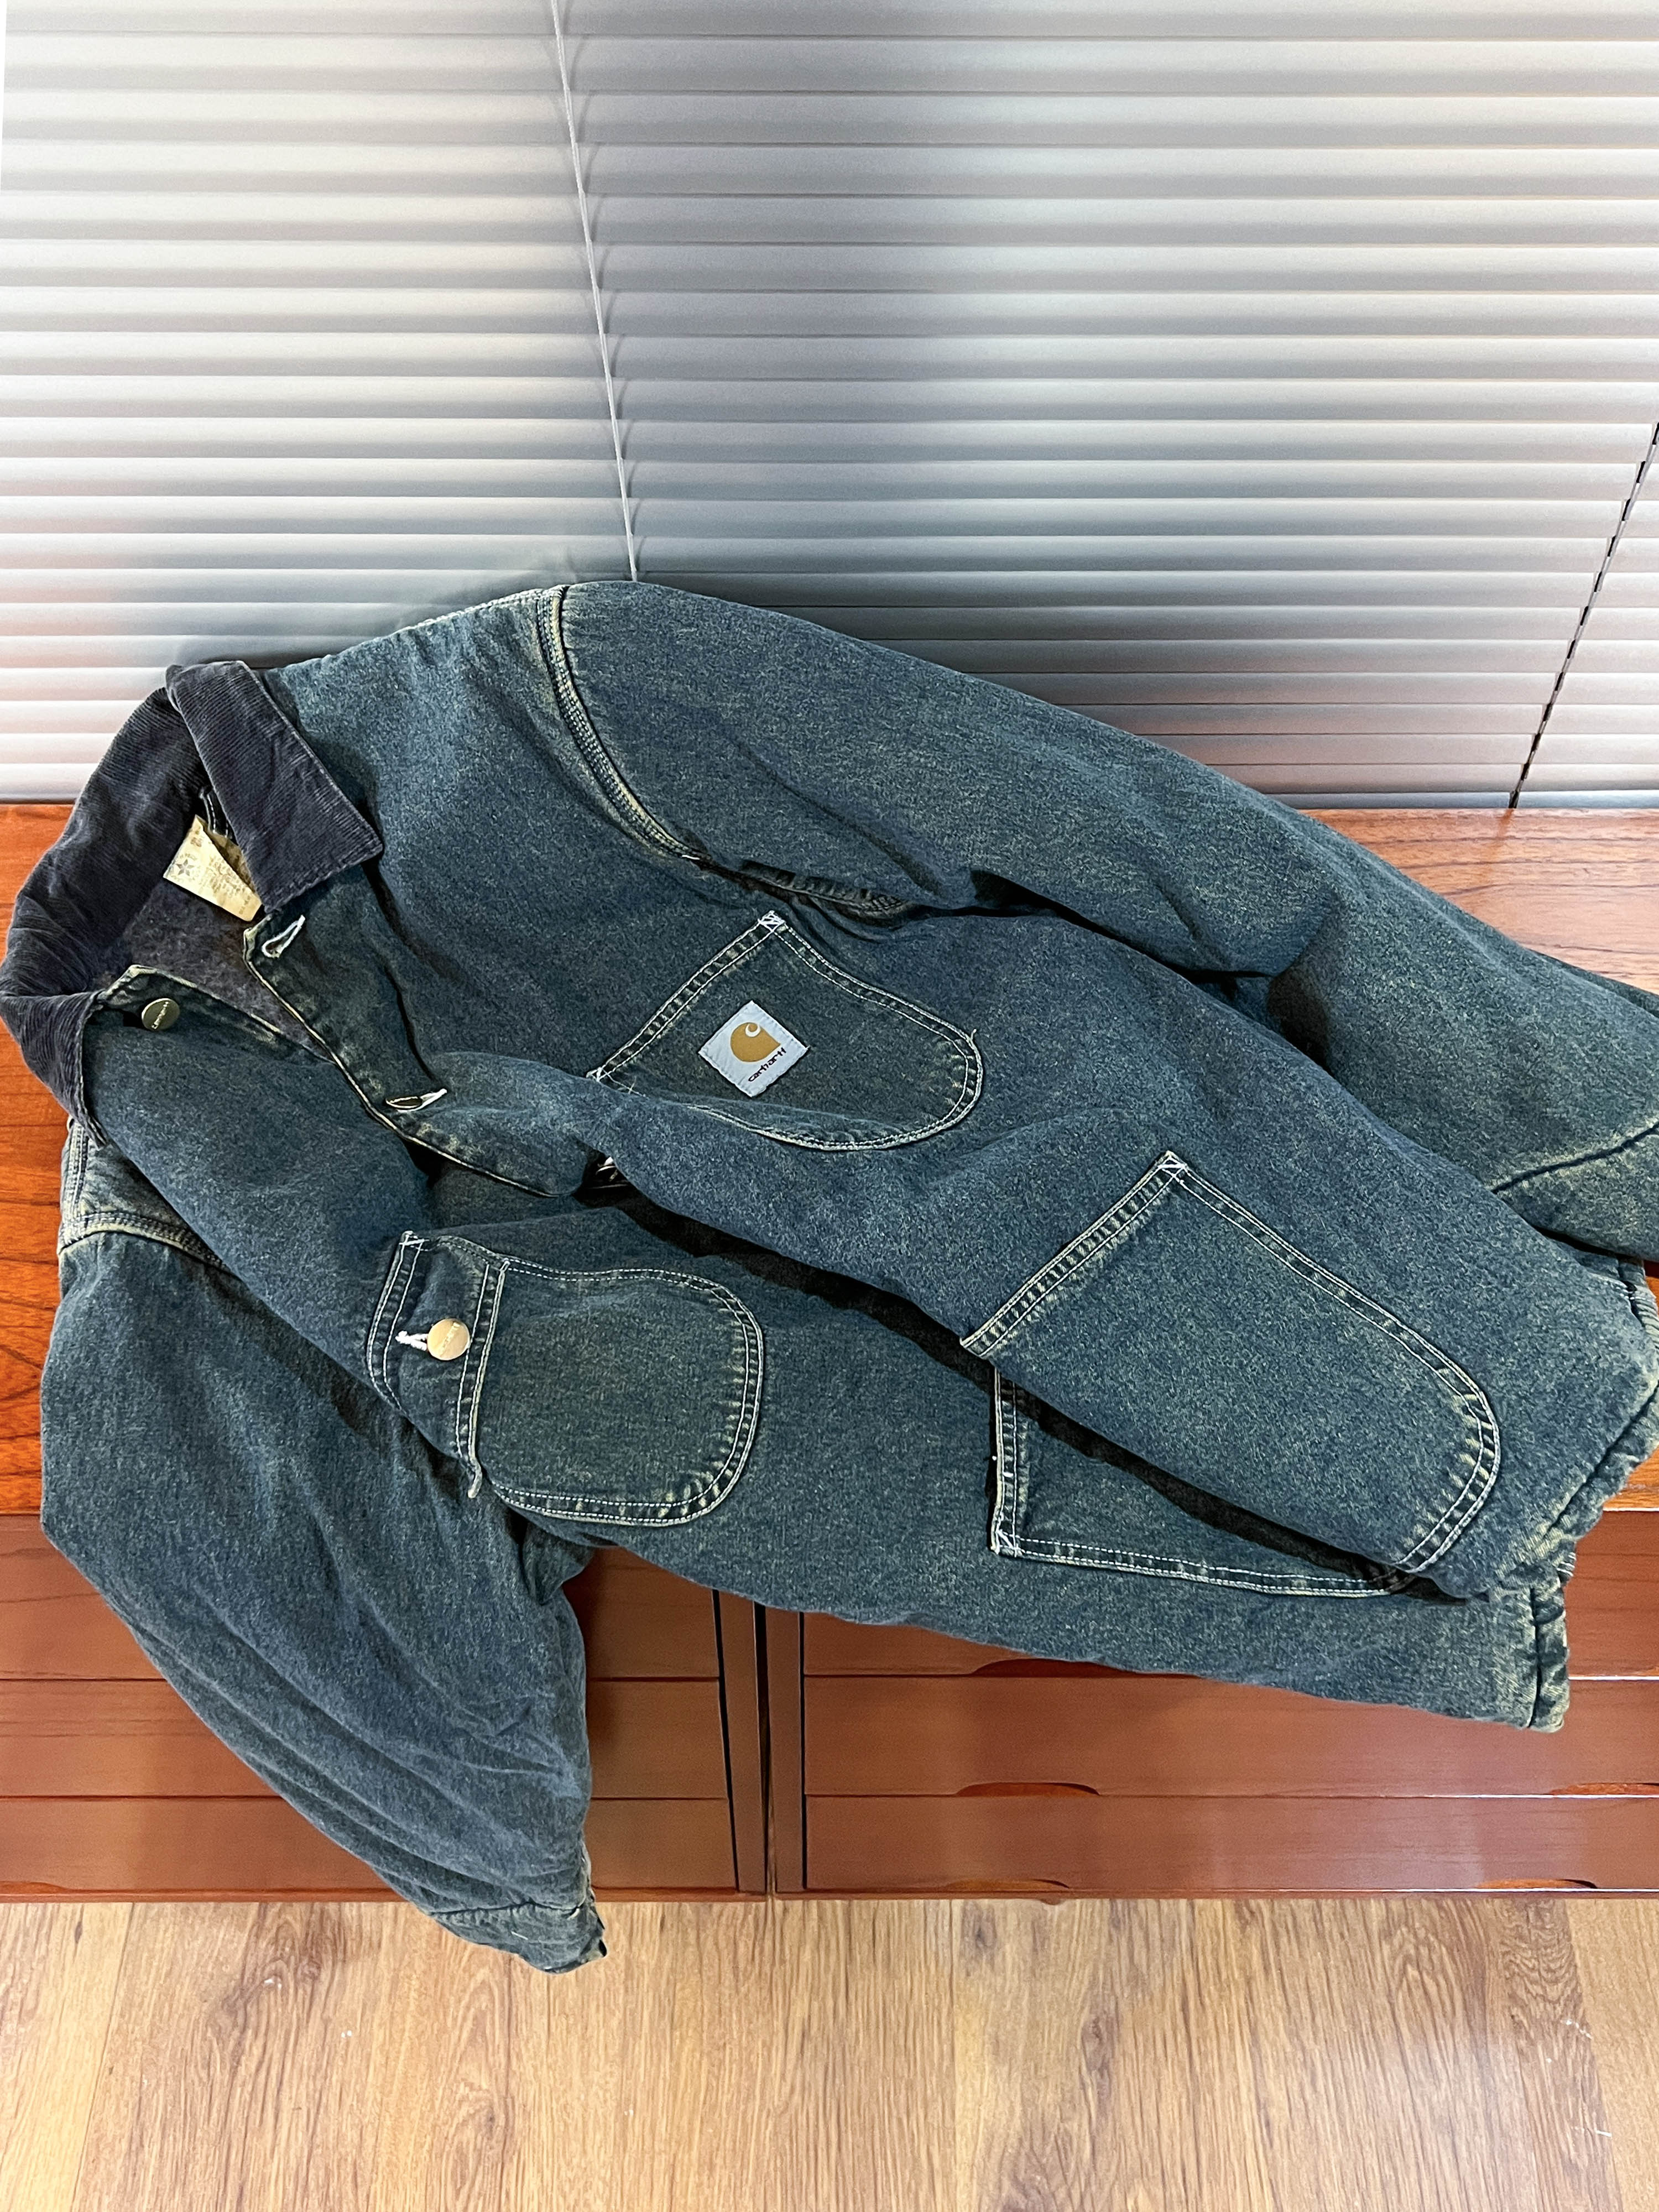 vintage Carhartt coverall